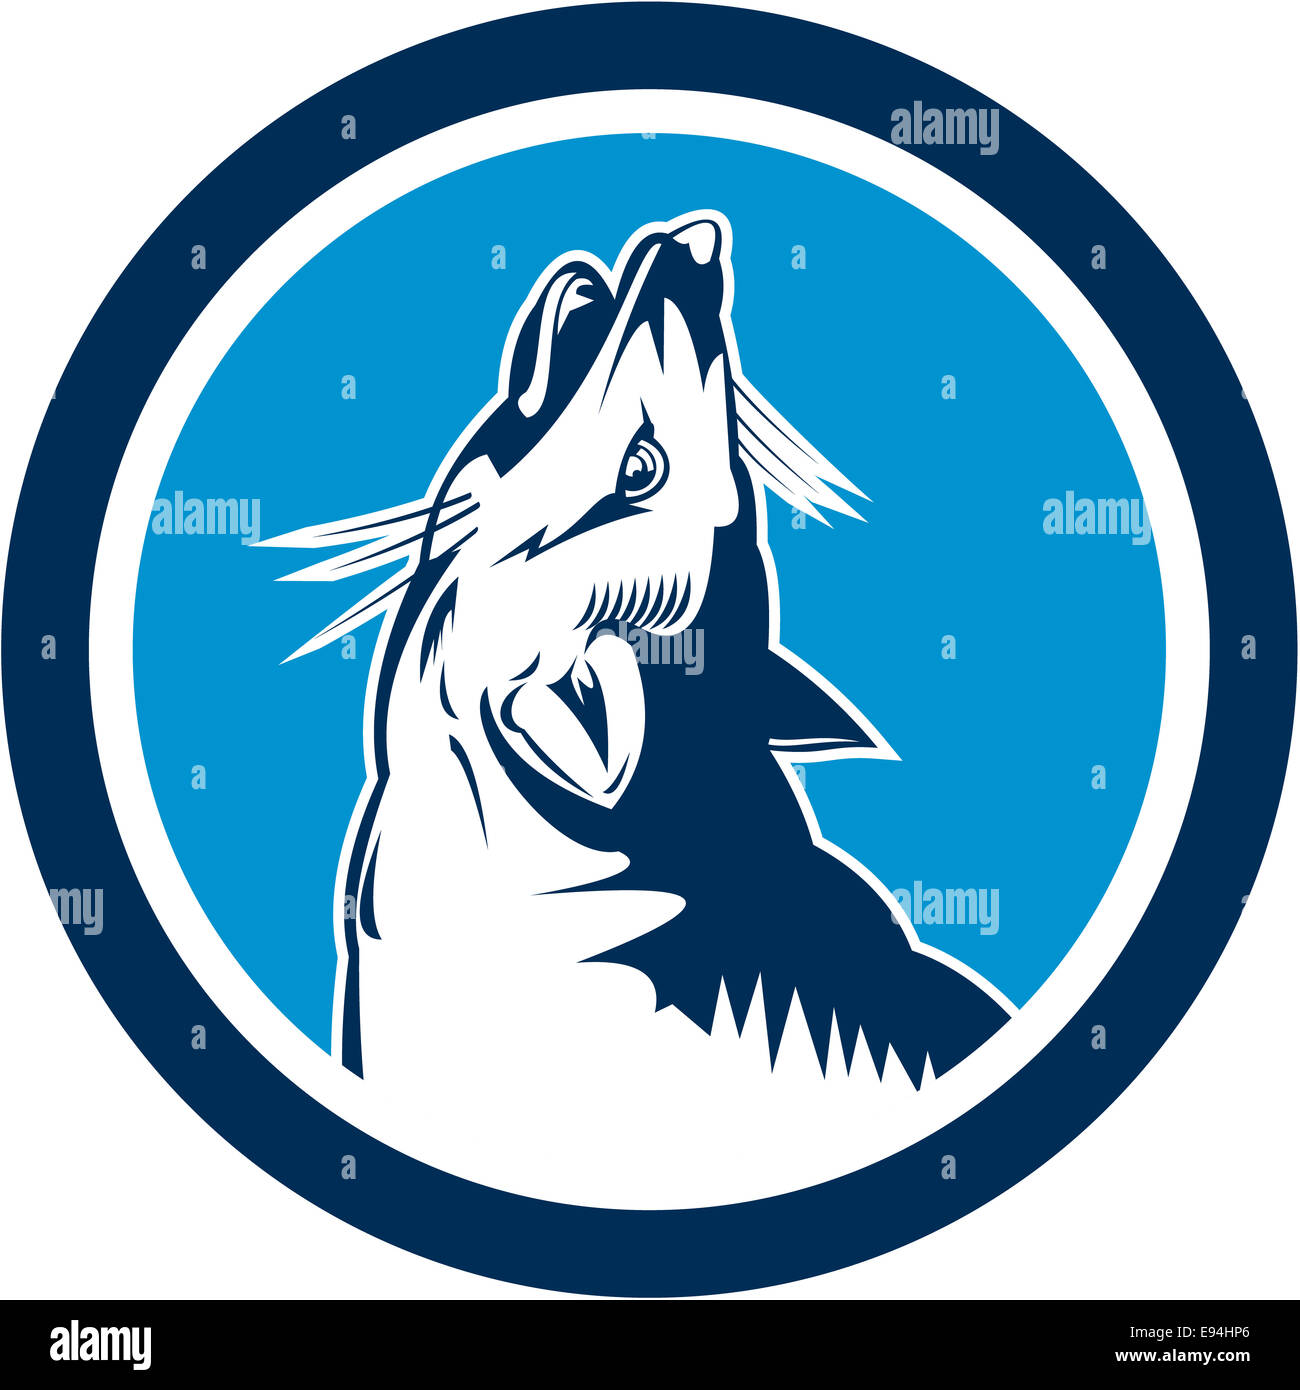 Illustration of an angry fox wild dog wolf head howling viewed from the side set inside circle on isolated background done in retro style. Stock Photo